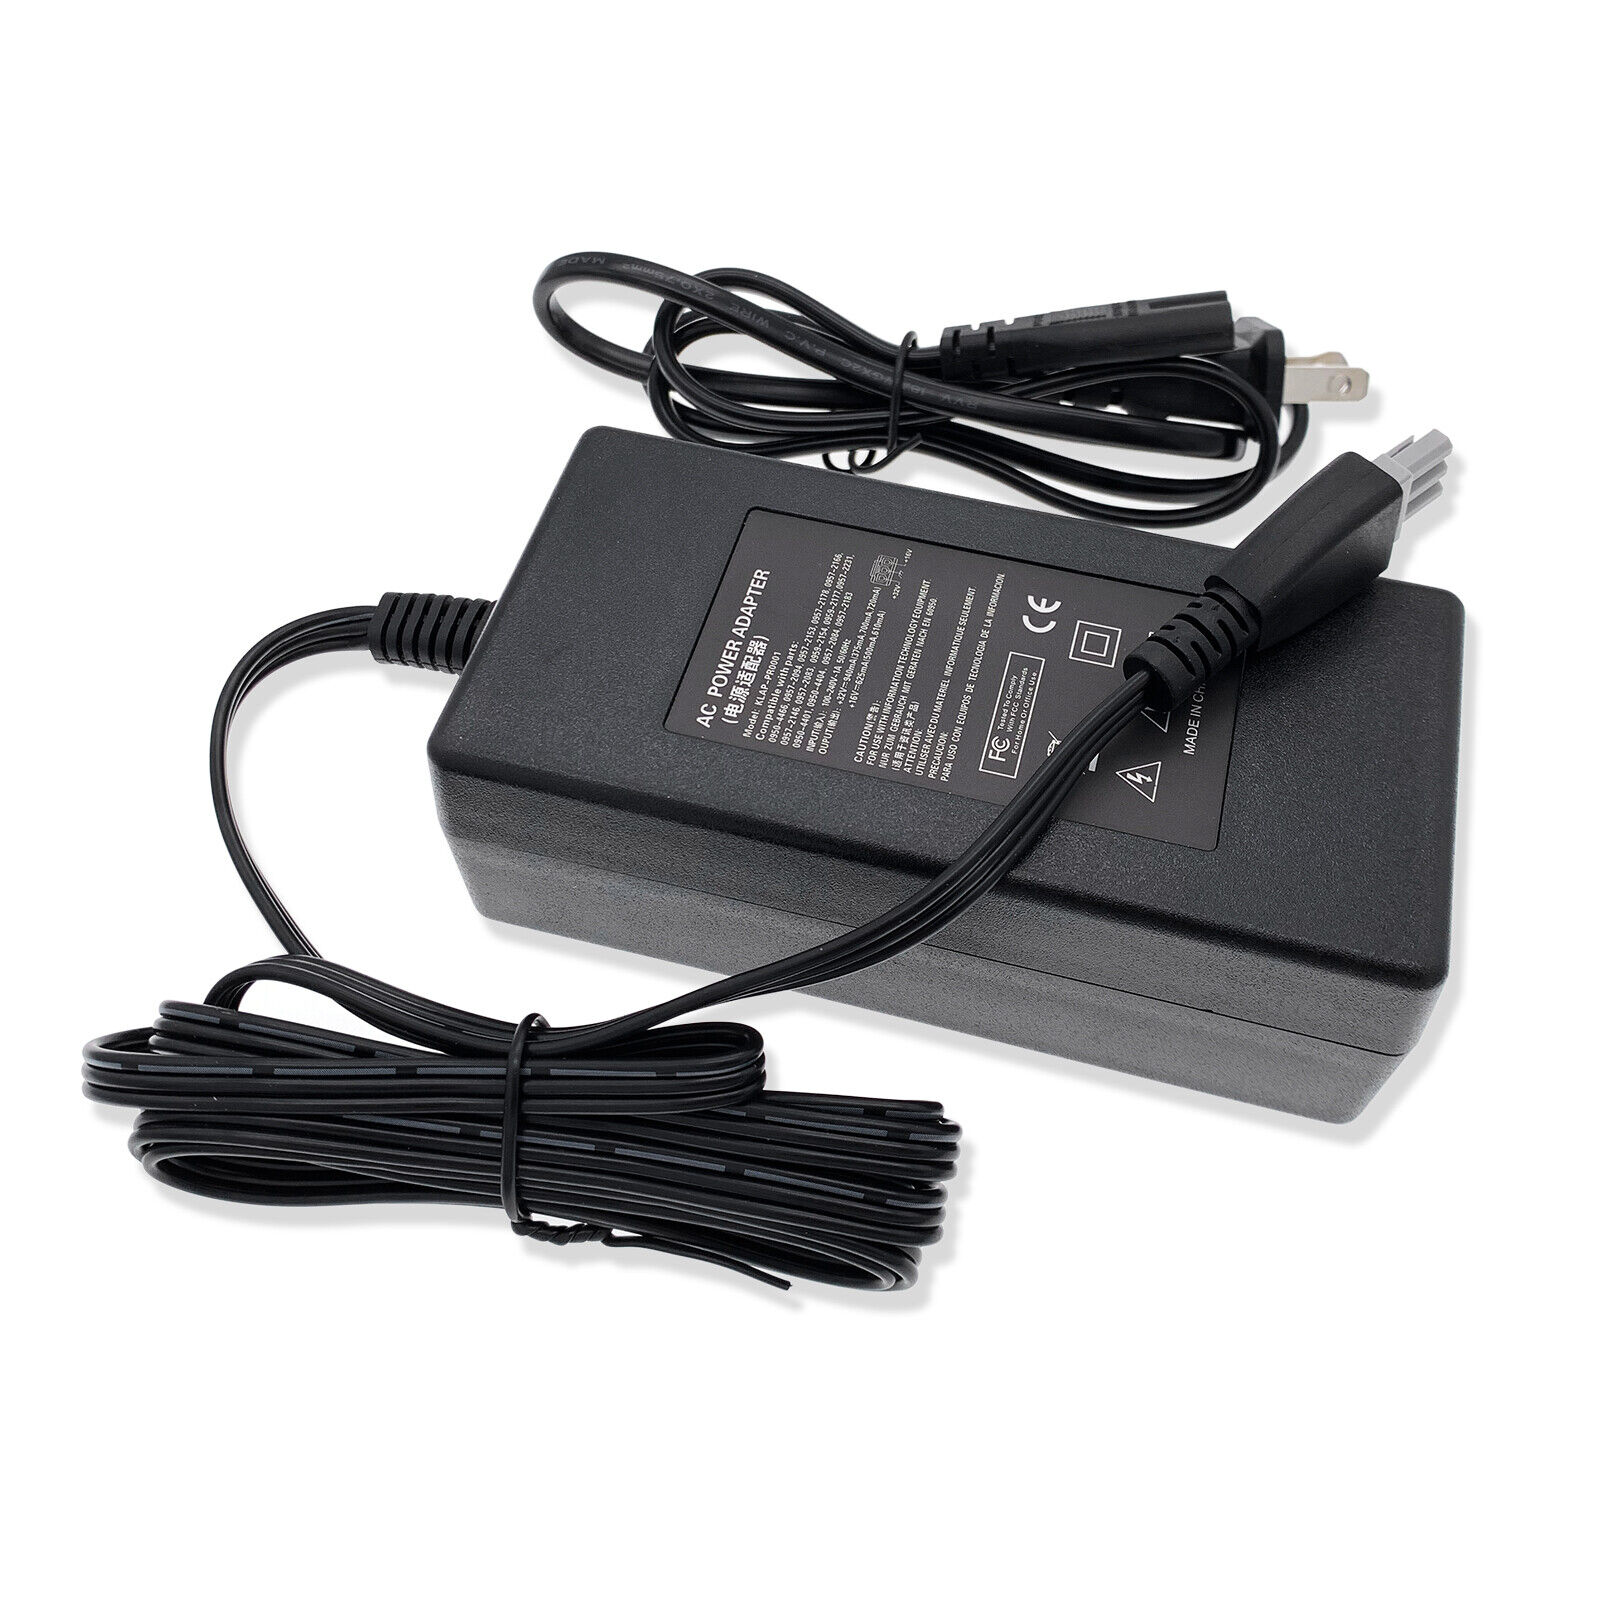 AC Adapter For HP PhotoSmart 7600w 7660 7660v Printer Charger Power 0950-4401